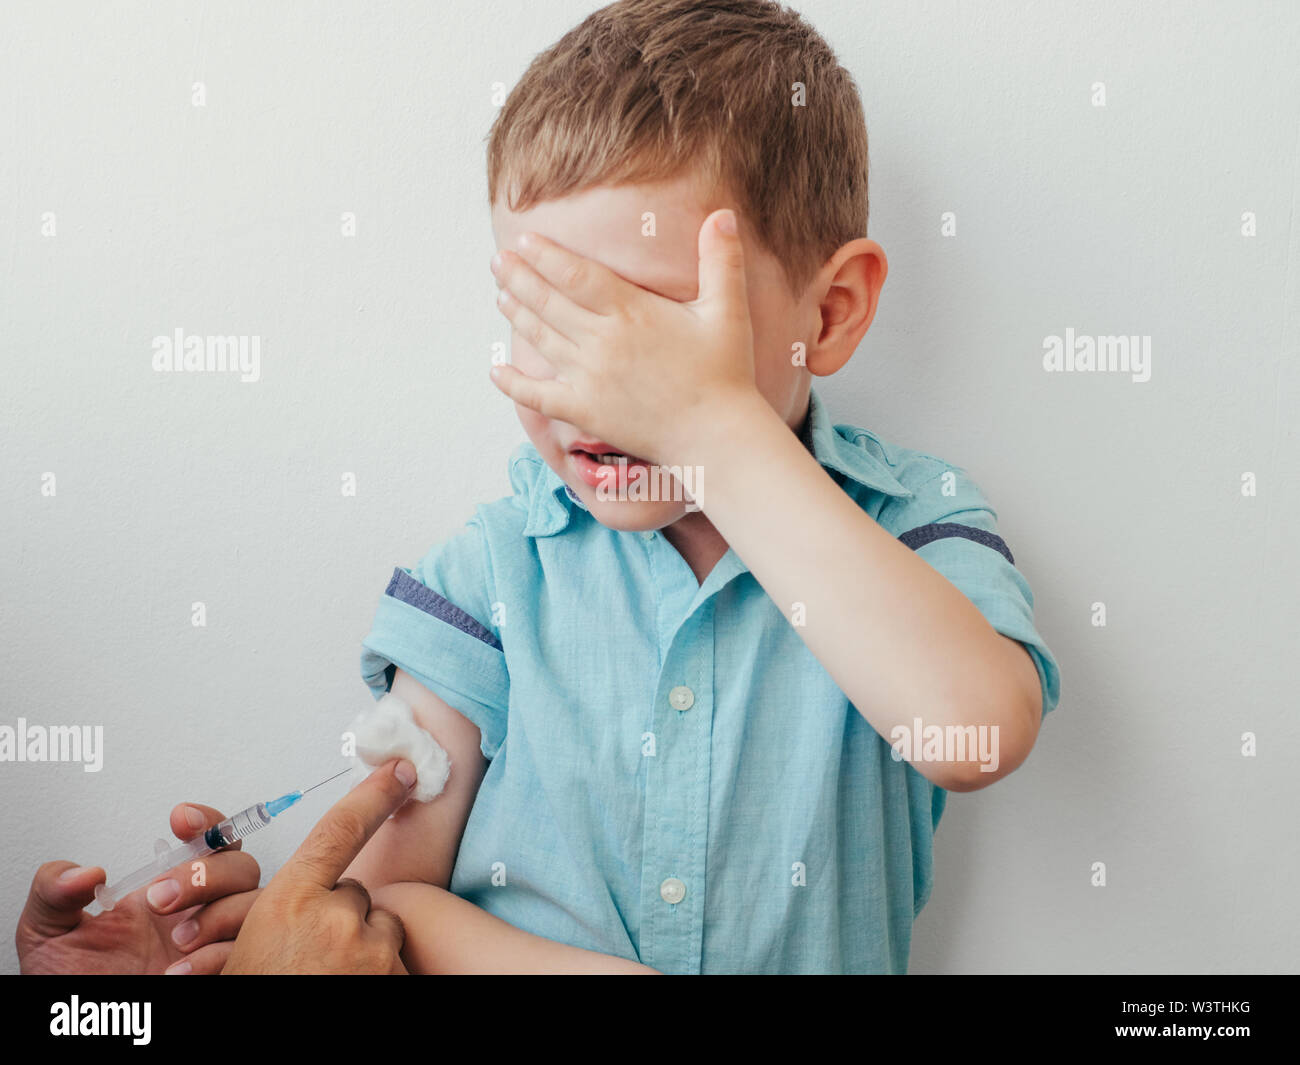 Little boy is afraid to vaccinate. Little caucasian baby boy in blue shirt covered his eyes with hand during injection. Vaccination of children concept. Stock Photo